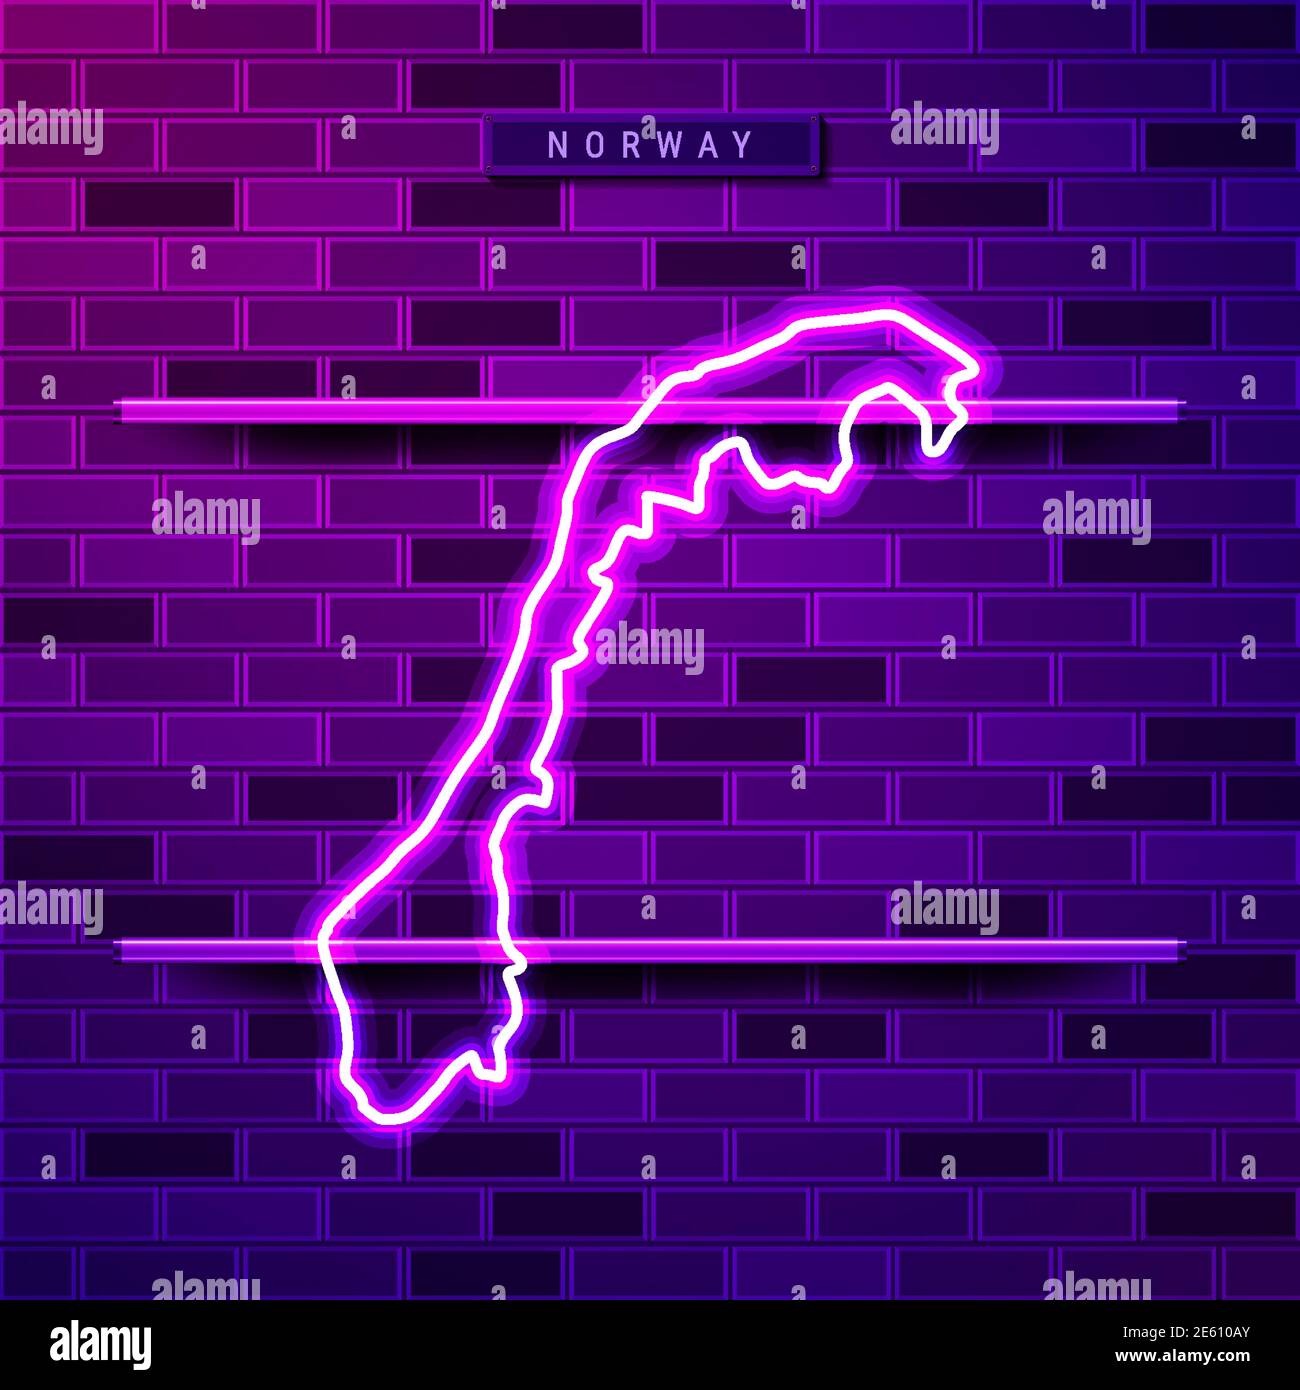 Norway map glowing neon lamp sign. Realistic vector illustration. Country name plate. Purple brick wall, violet glow, metal holders. Stock Vector